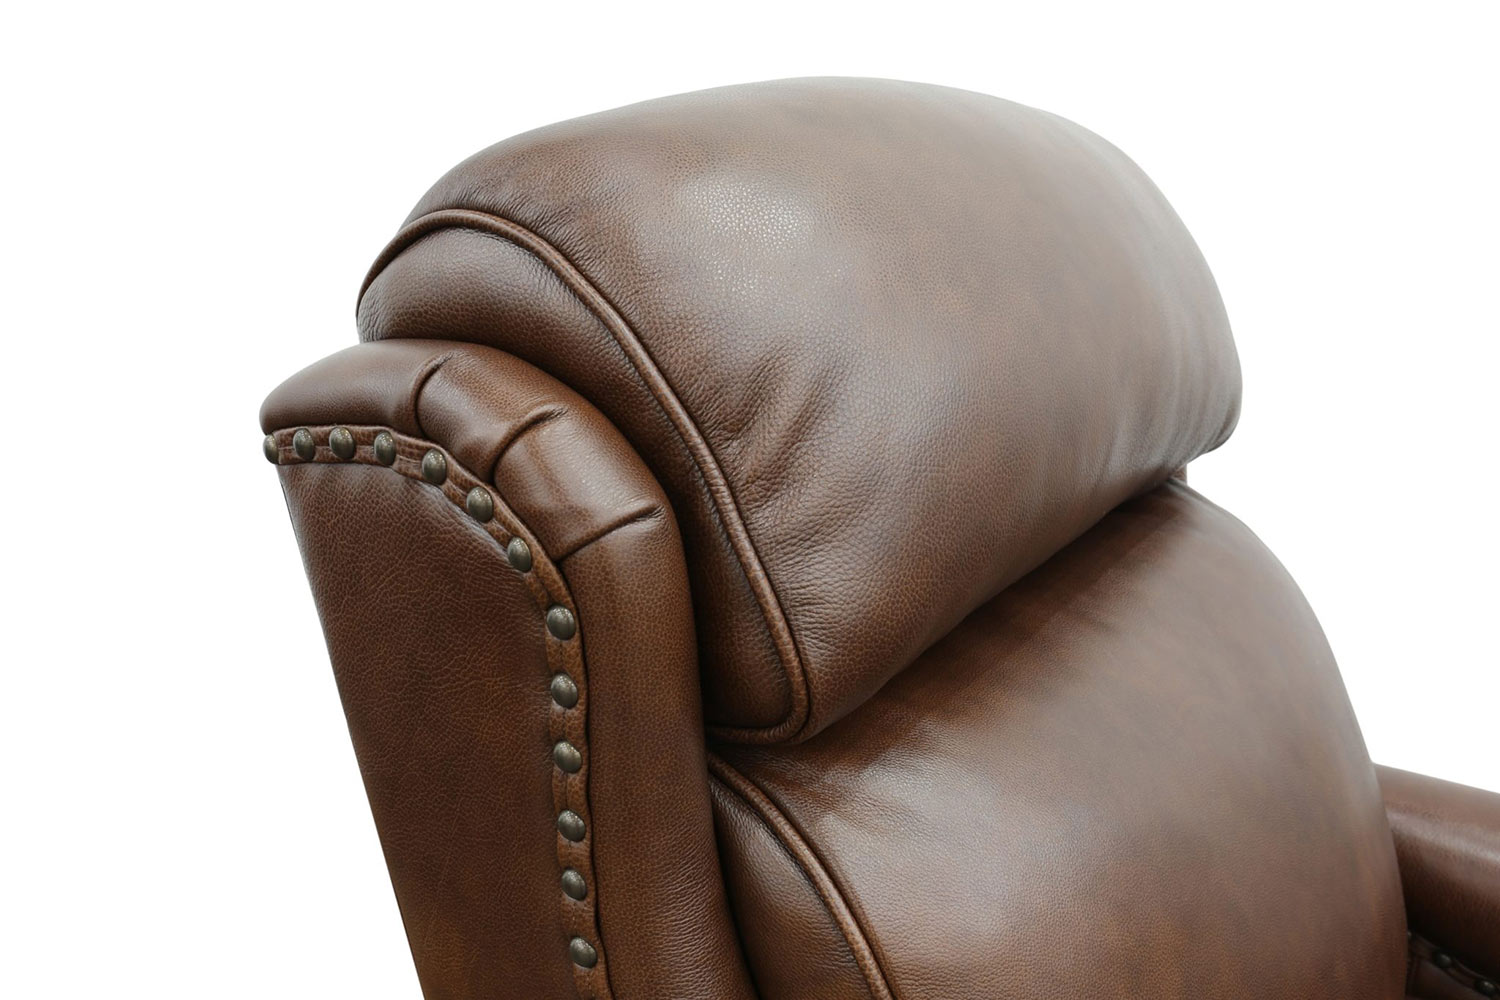 Barcalounger Montana Power Recliner Chair with Power Head Rest - Shoreham Chocolate/all leather